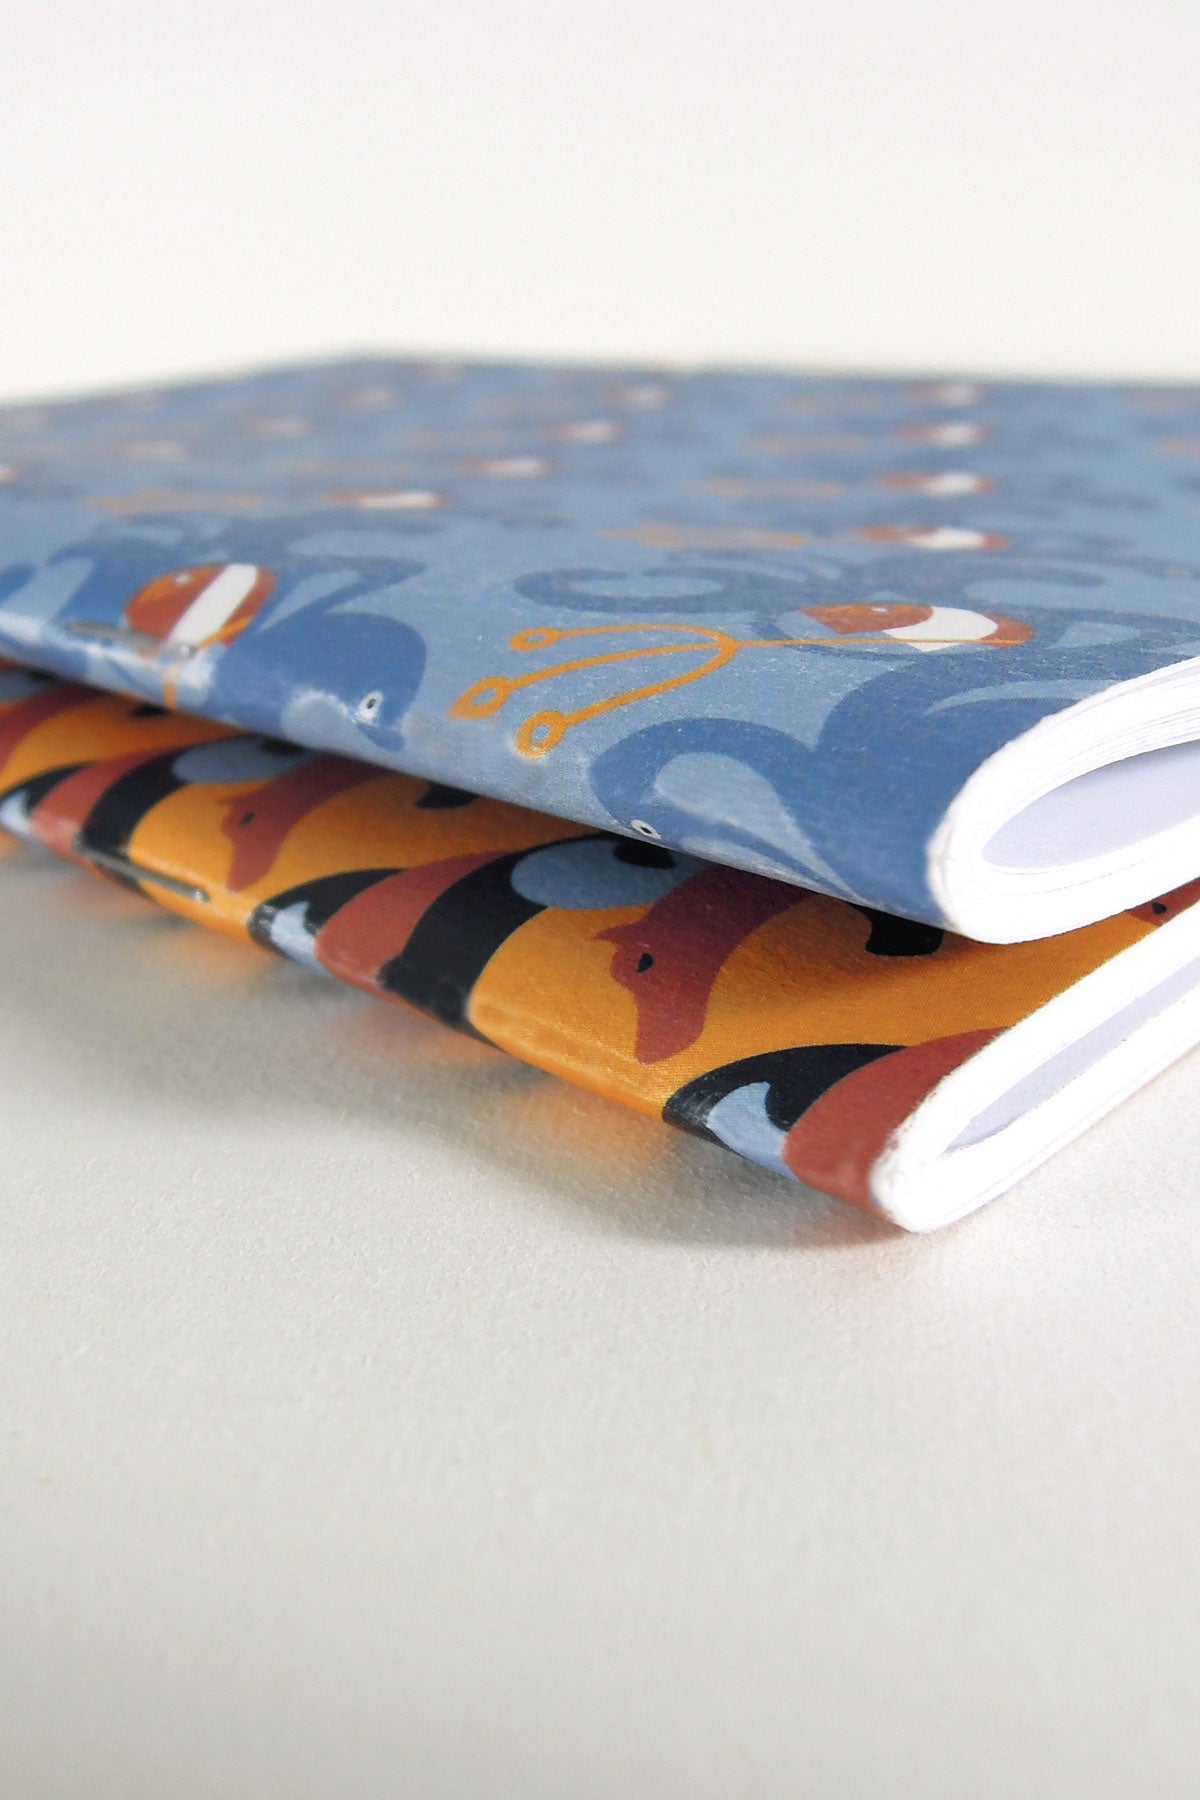 Odyssey limited-edition notebooks. Binding details.